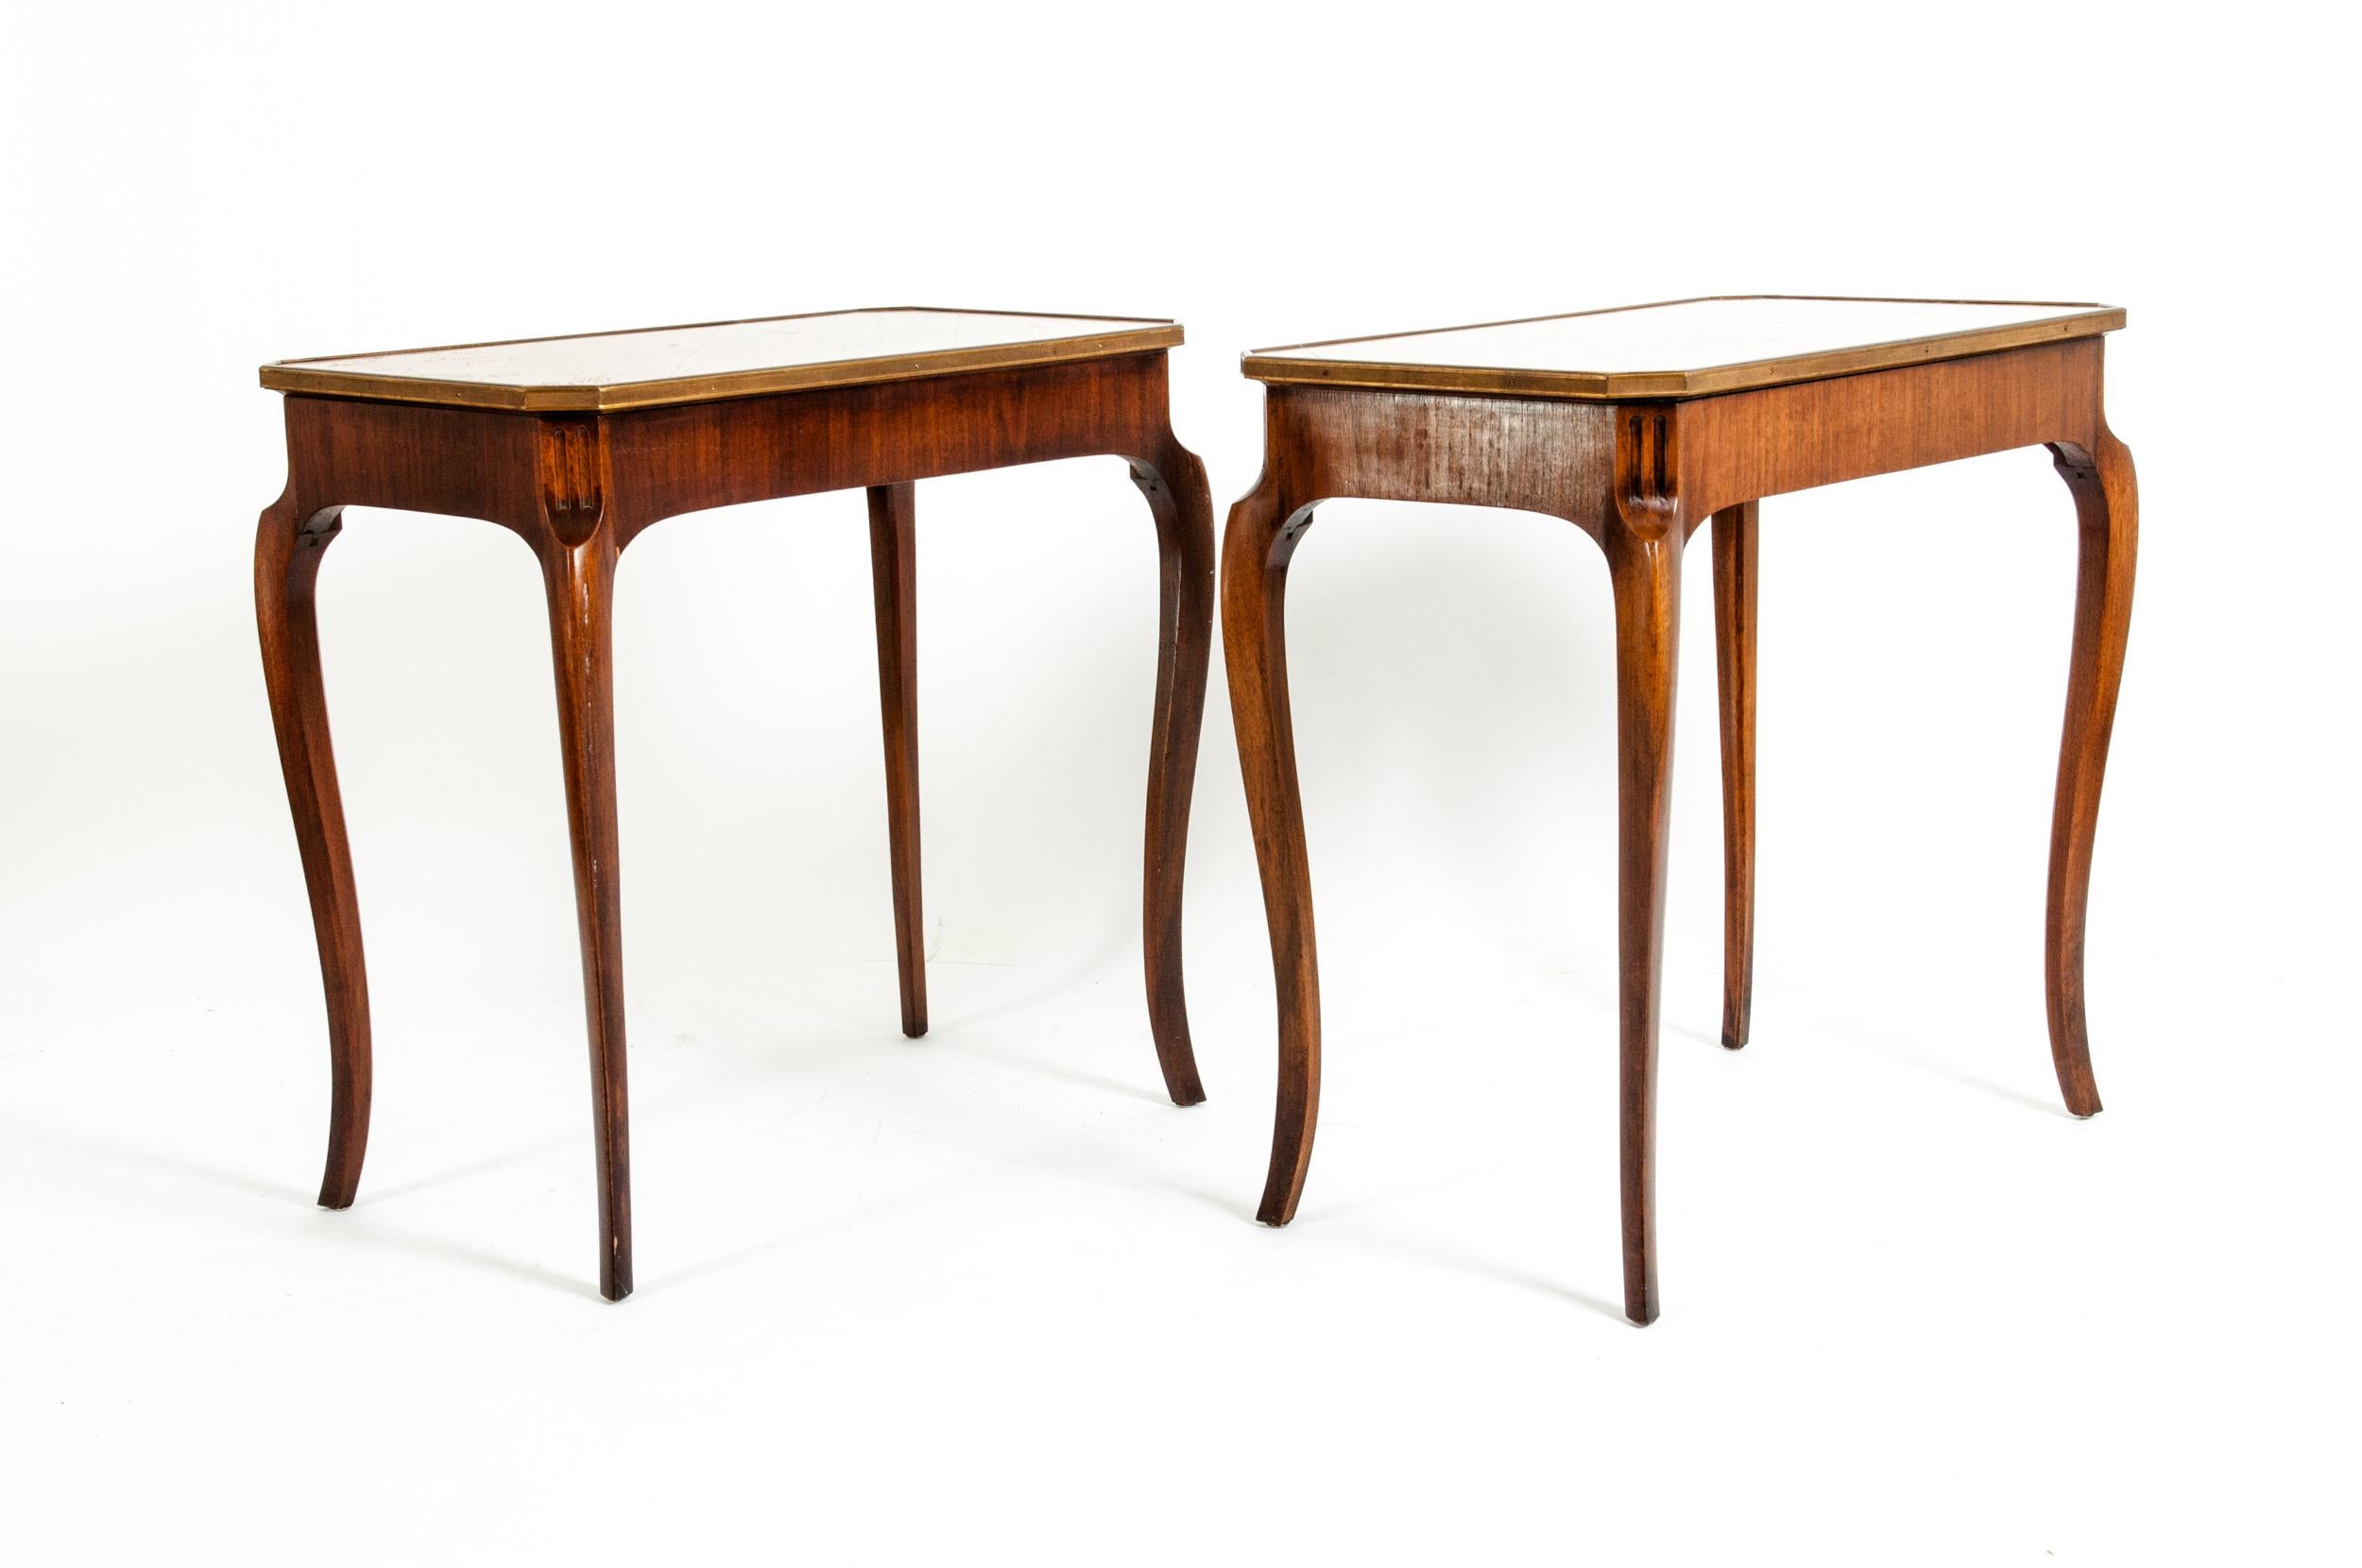 Pair of mahogany marquetry style end / side table. Each table is in excellent vintage condition. Minor wear consistent age / use. Each table measure stand about 27 inches L x 16 inches W x 26 inches H.